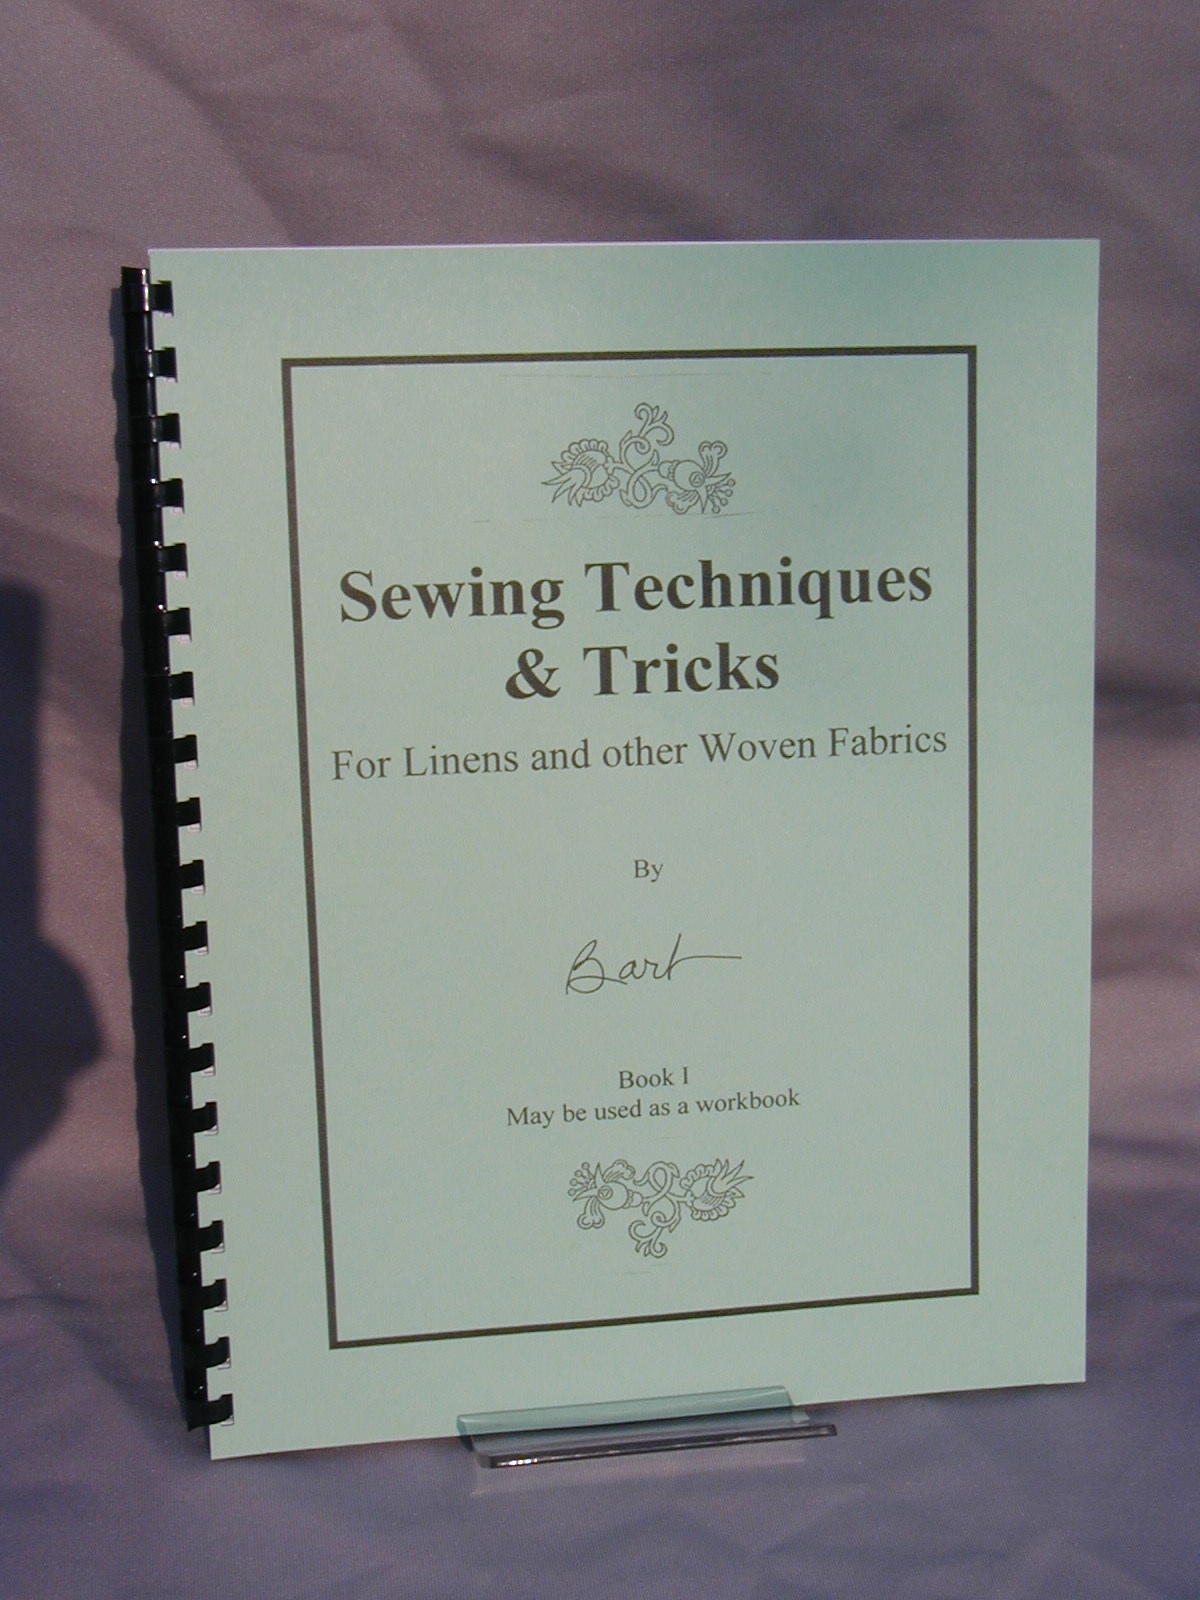 Sewing Techniques & Tricks